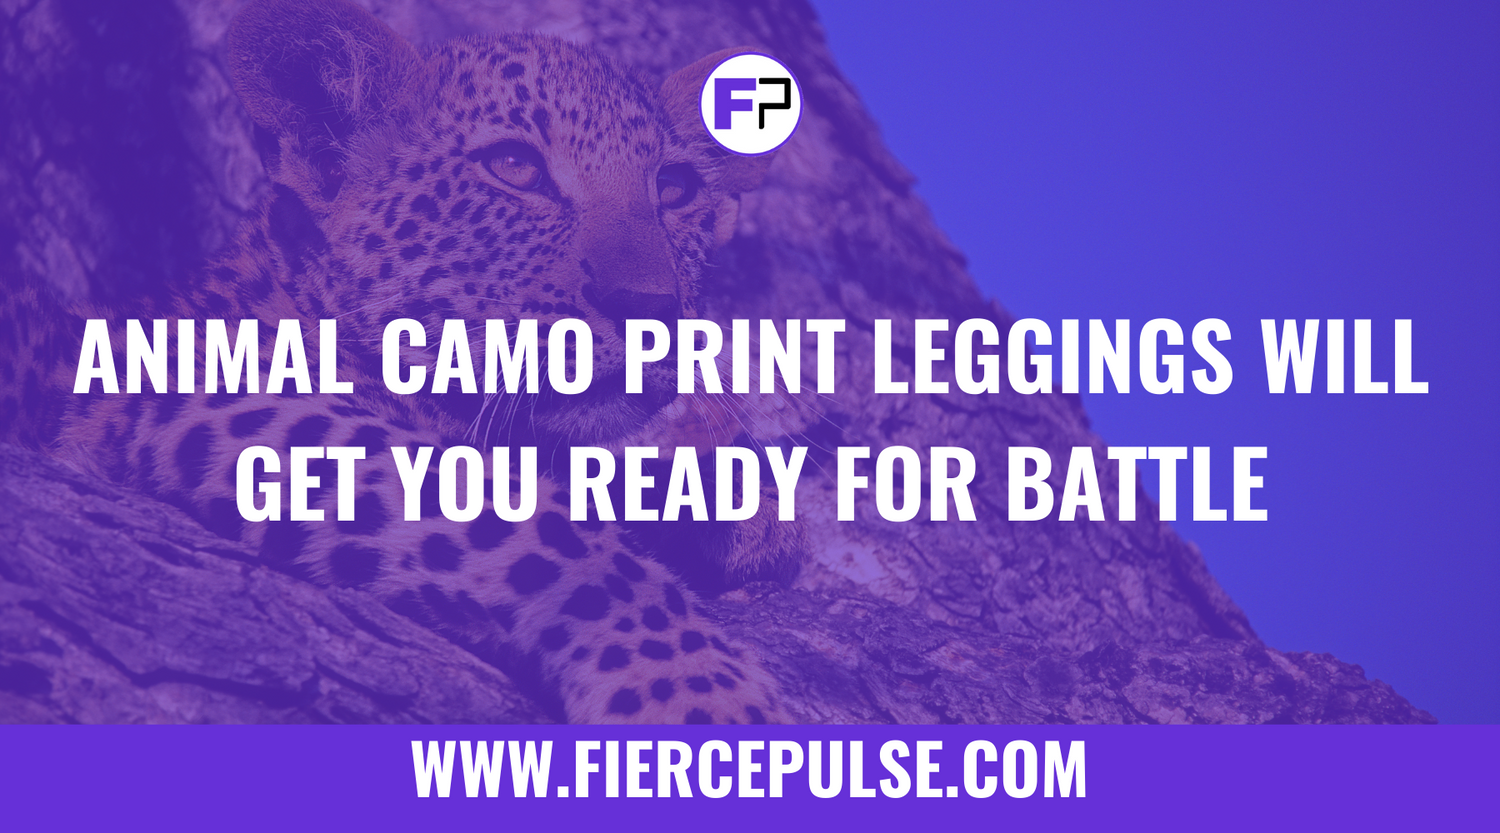 Animal Camo Print Leggings Will Get You Ready for Battle